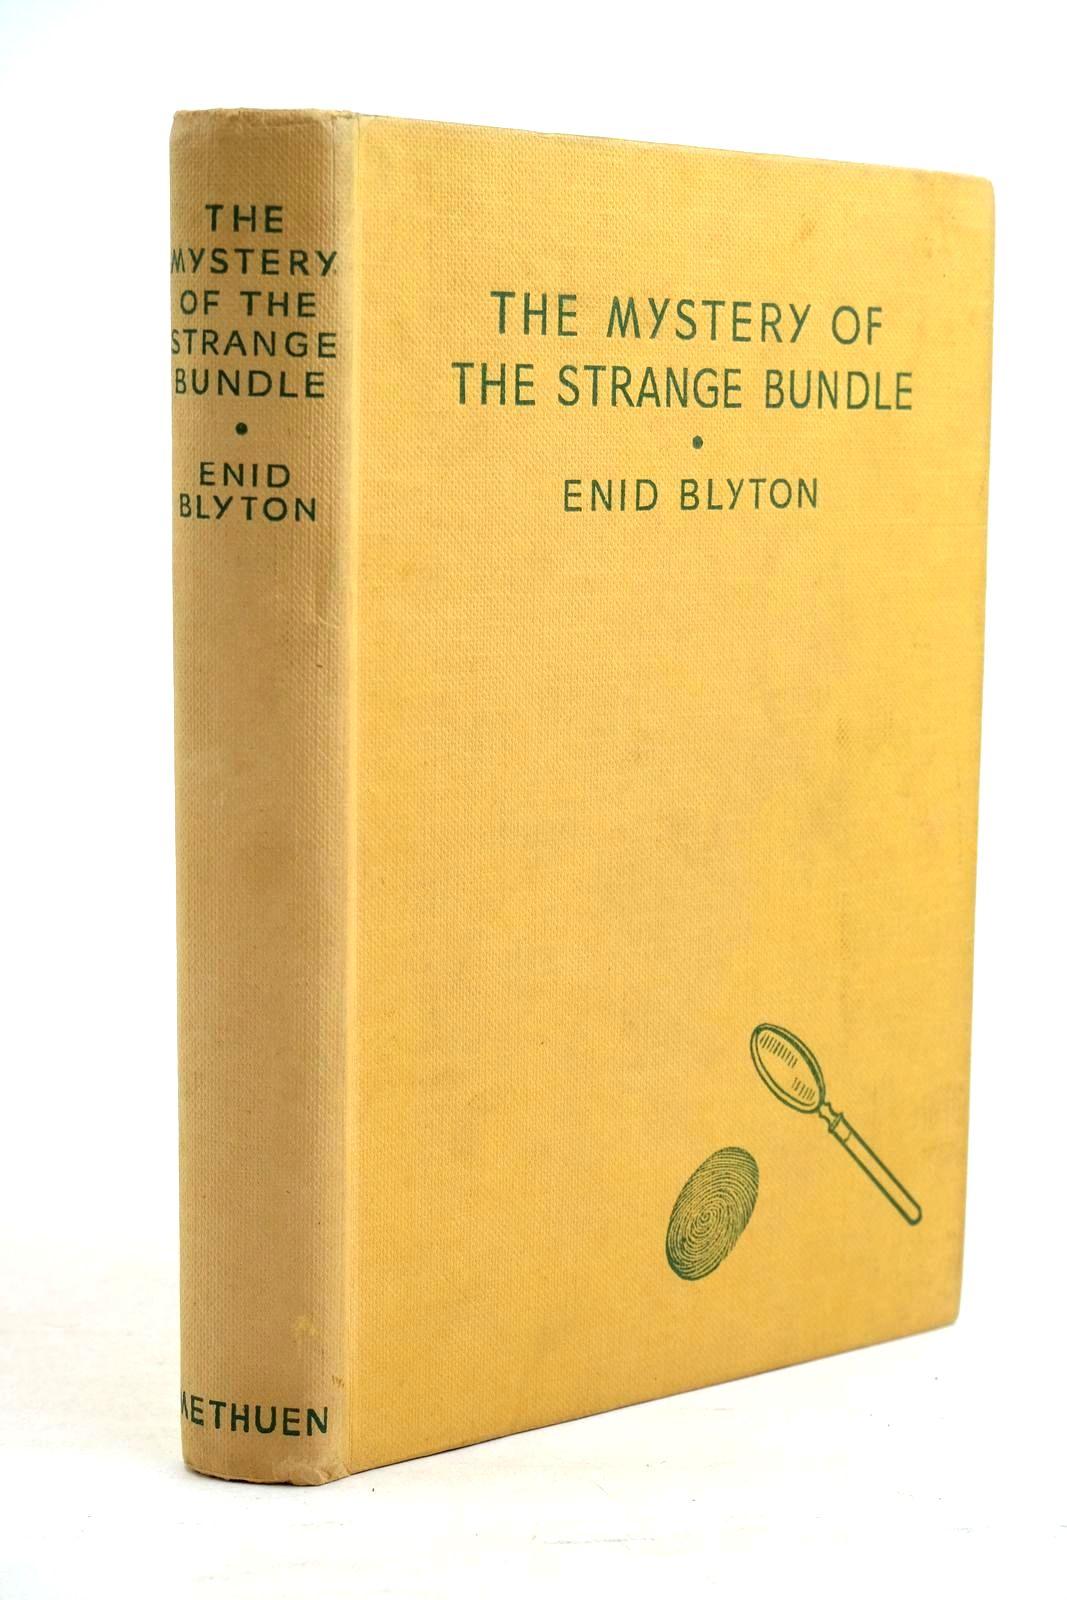 Photo of THE MYSTERY OF THE STRANGE BUNDLE written by Blyton, Enid illustrated by Evans, Treyer published by Methuen &amp; Co. Ltd. (STOCK CODE: 1320725)  for sale by Stella & Rose's Books